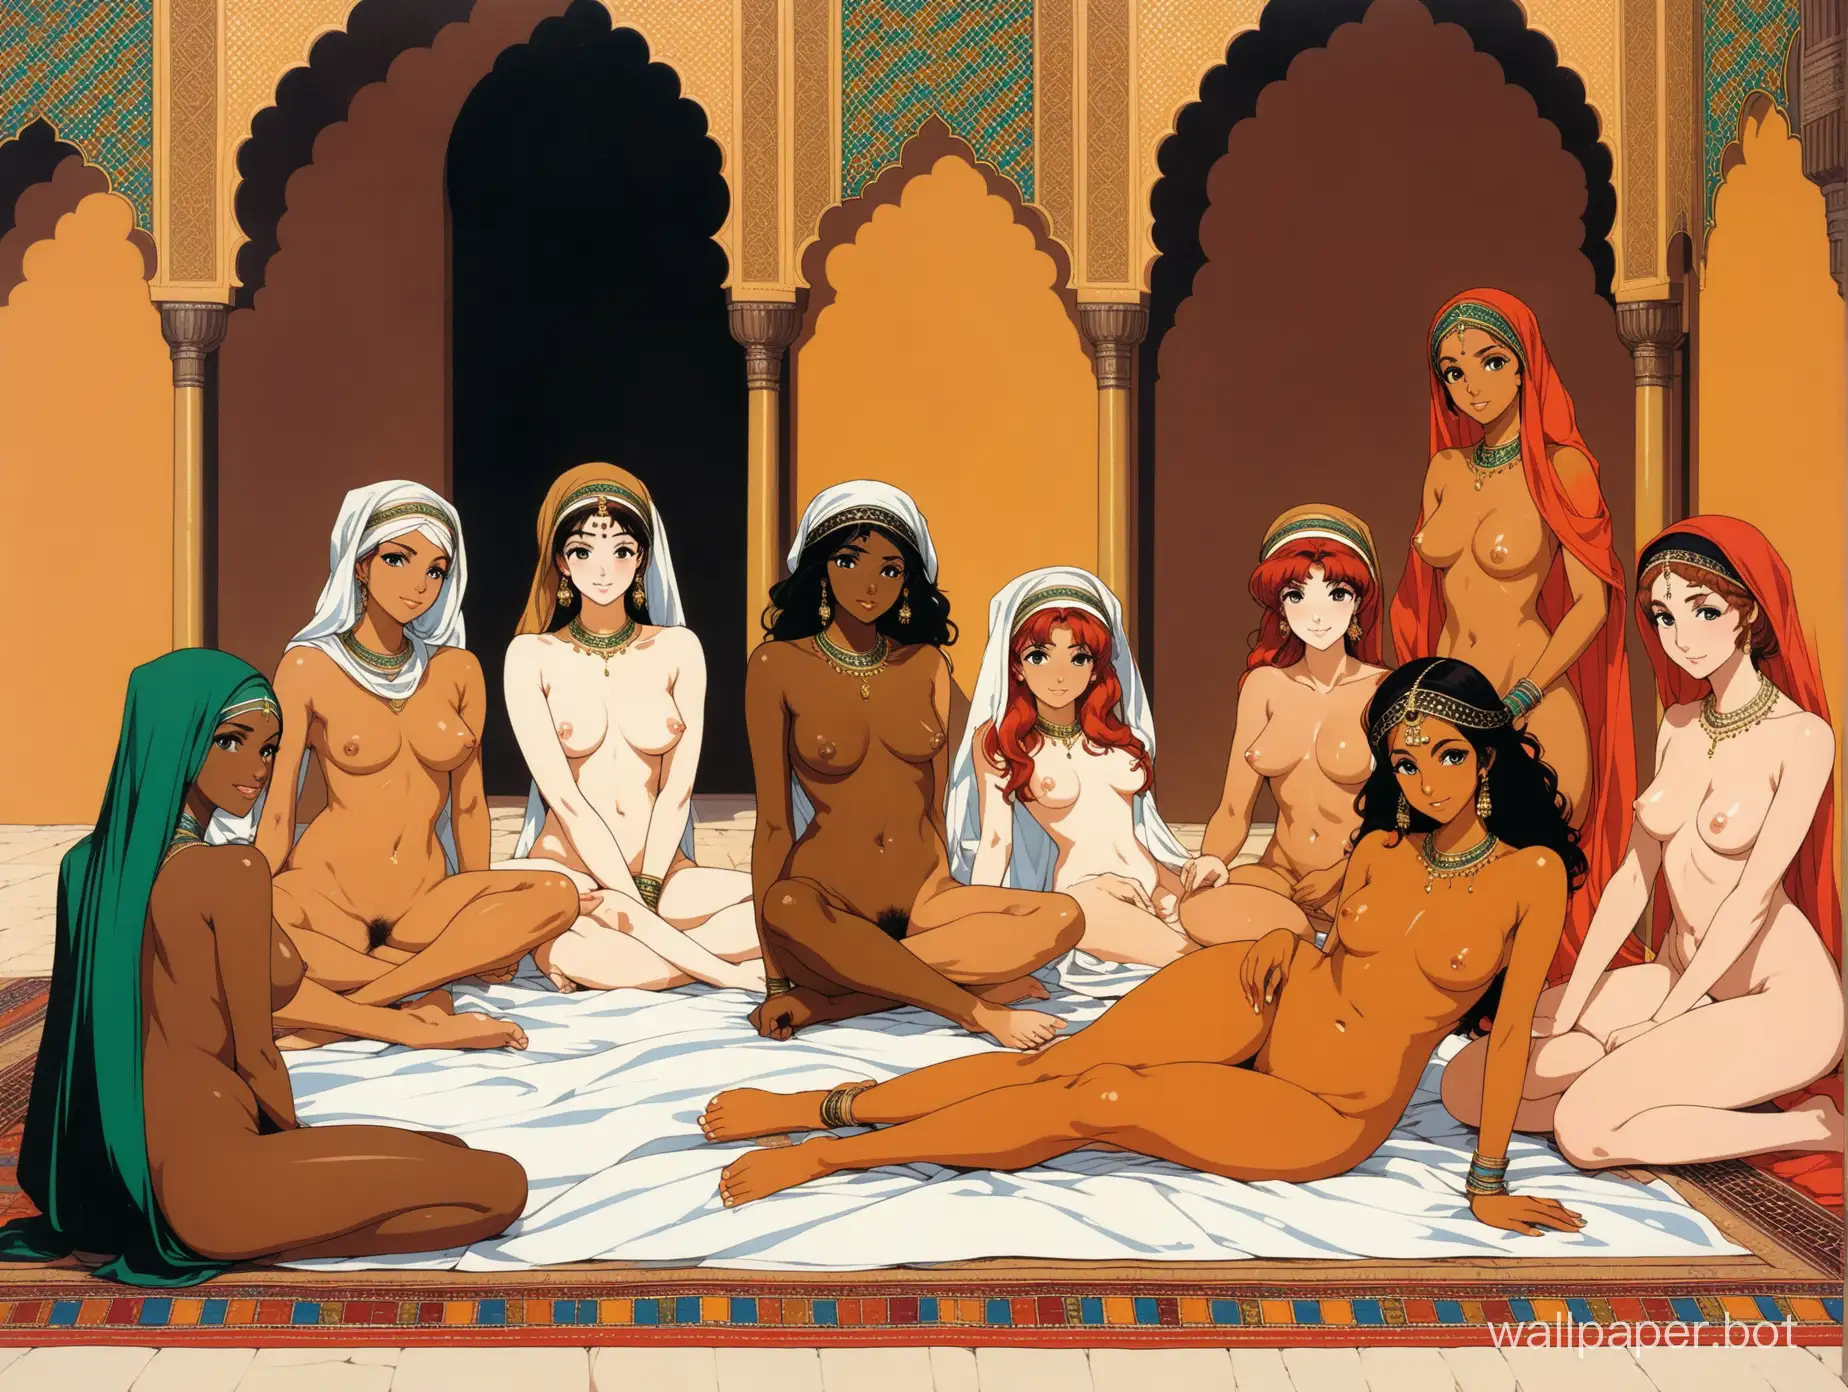 classical painting, orientalist, Harem of ethnically diverse naked young women, african women and redhead women, lounging around, medieval muslim palace, middle eastern, hairy, different hair colors, retro 1980s anime